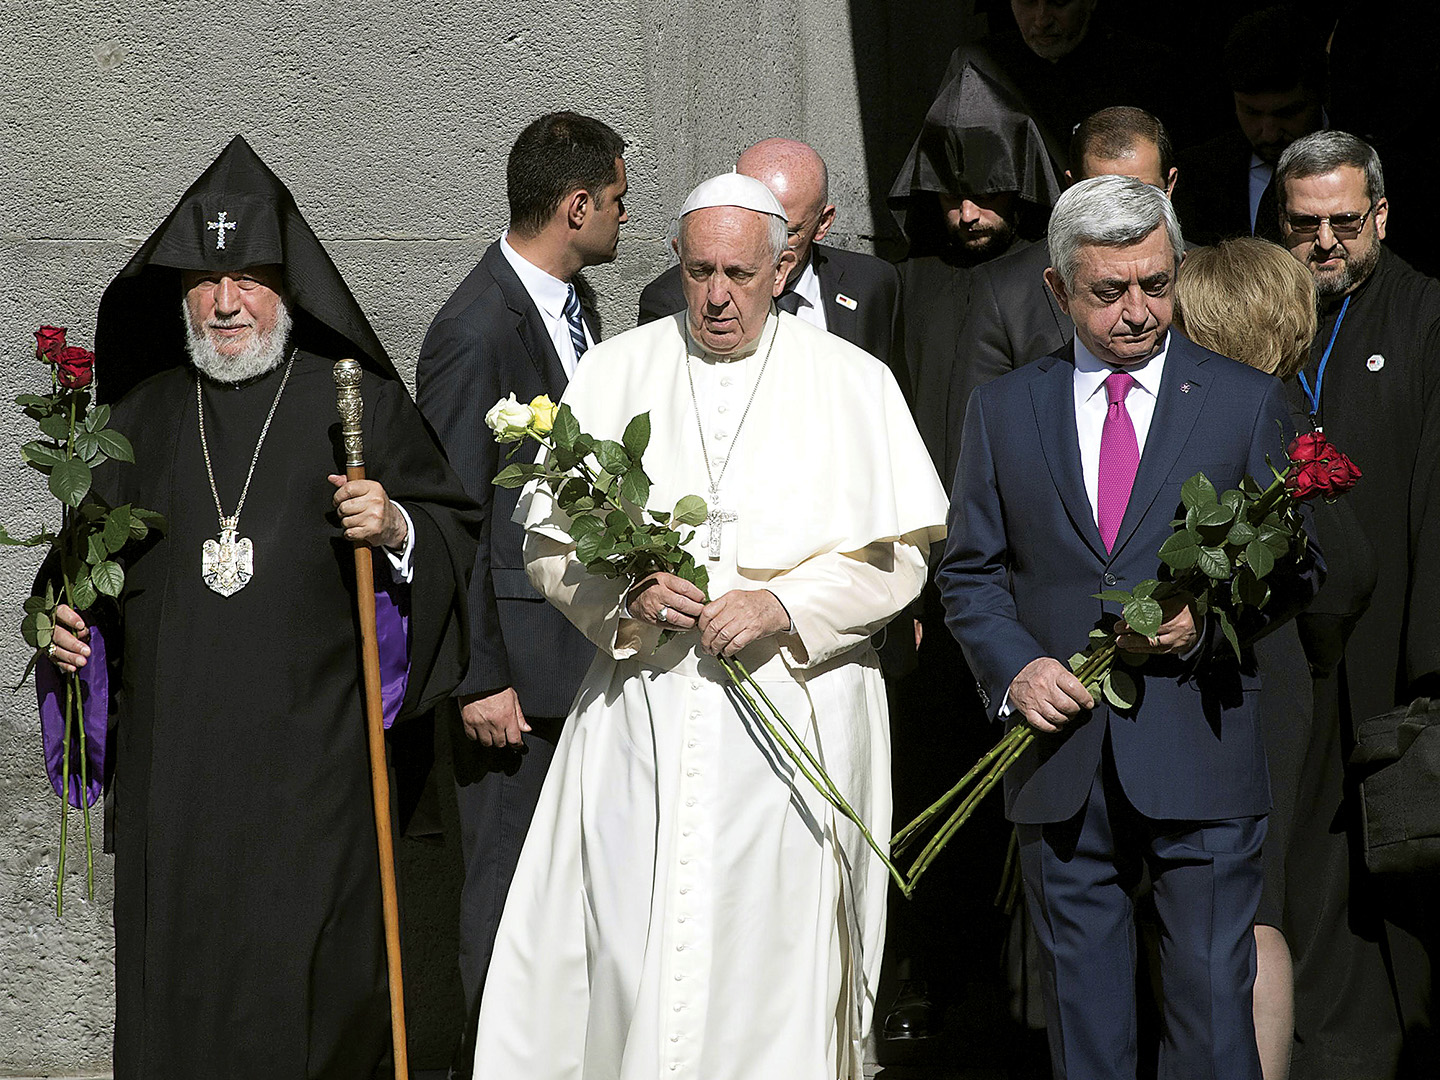 Pope Francis, Catholicos of All Armenians Karekin II and President Serzh Sargsyan arrive for a ceremony at the Tzitzernakaberd Genocide Memorial.